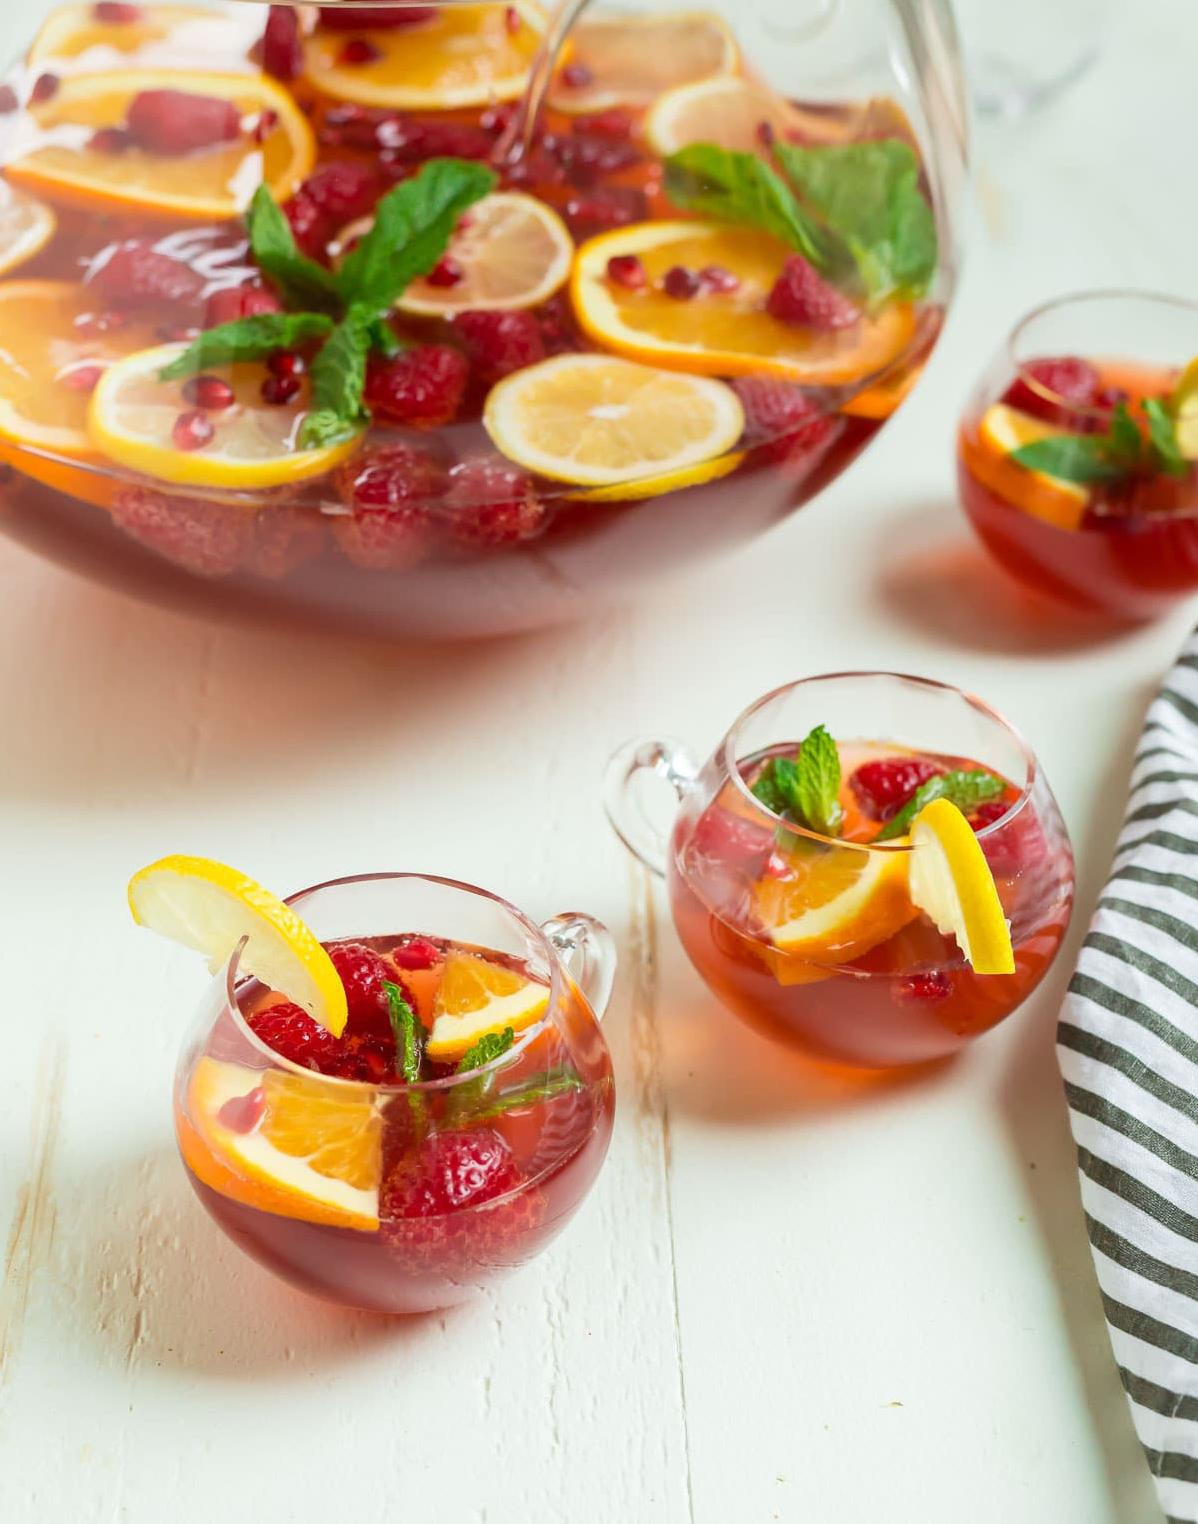  Sweet and bubbly, this champagne fruit punch is perfect for any party.